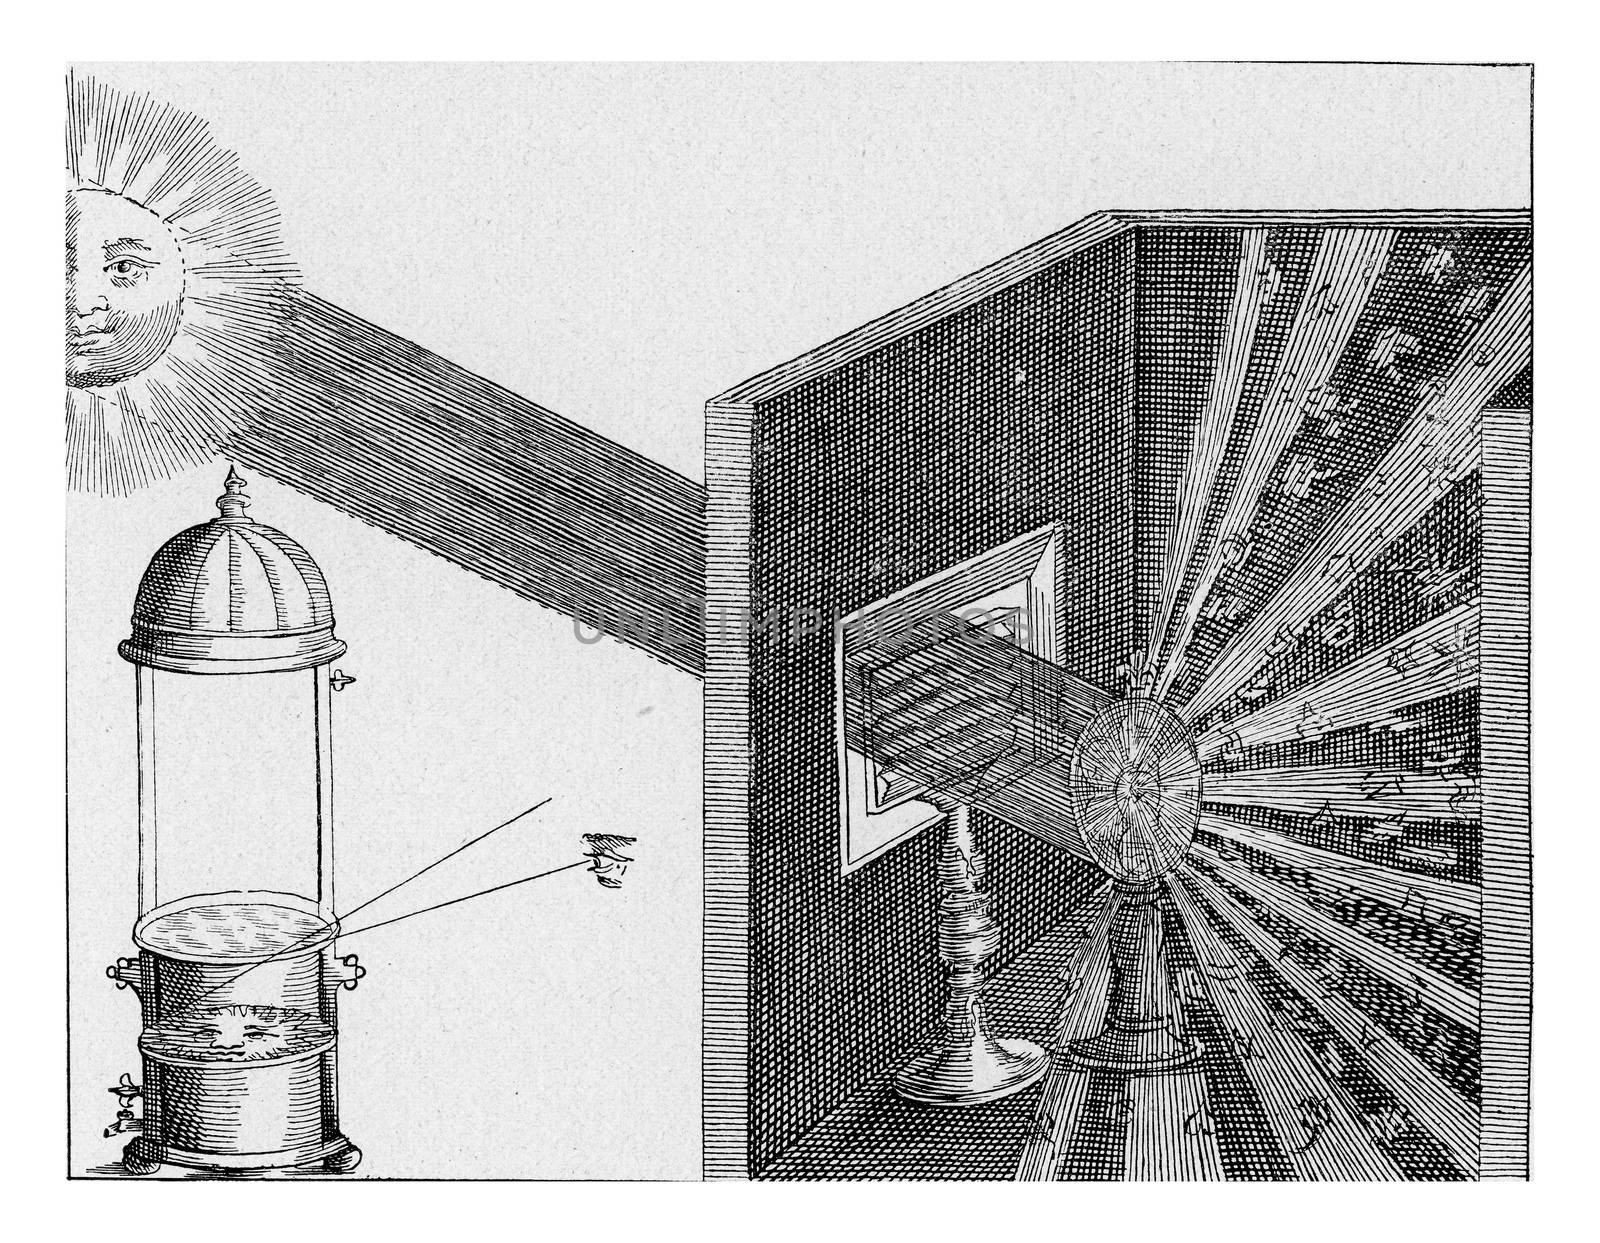 Refraction and diffusion of sunlight, vintage engraved illustration. From the Universe and Humanity, 1910.
